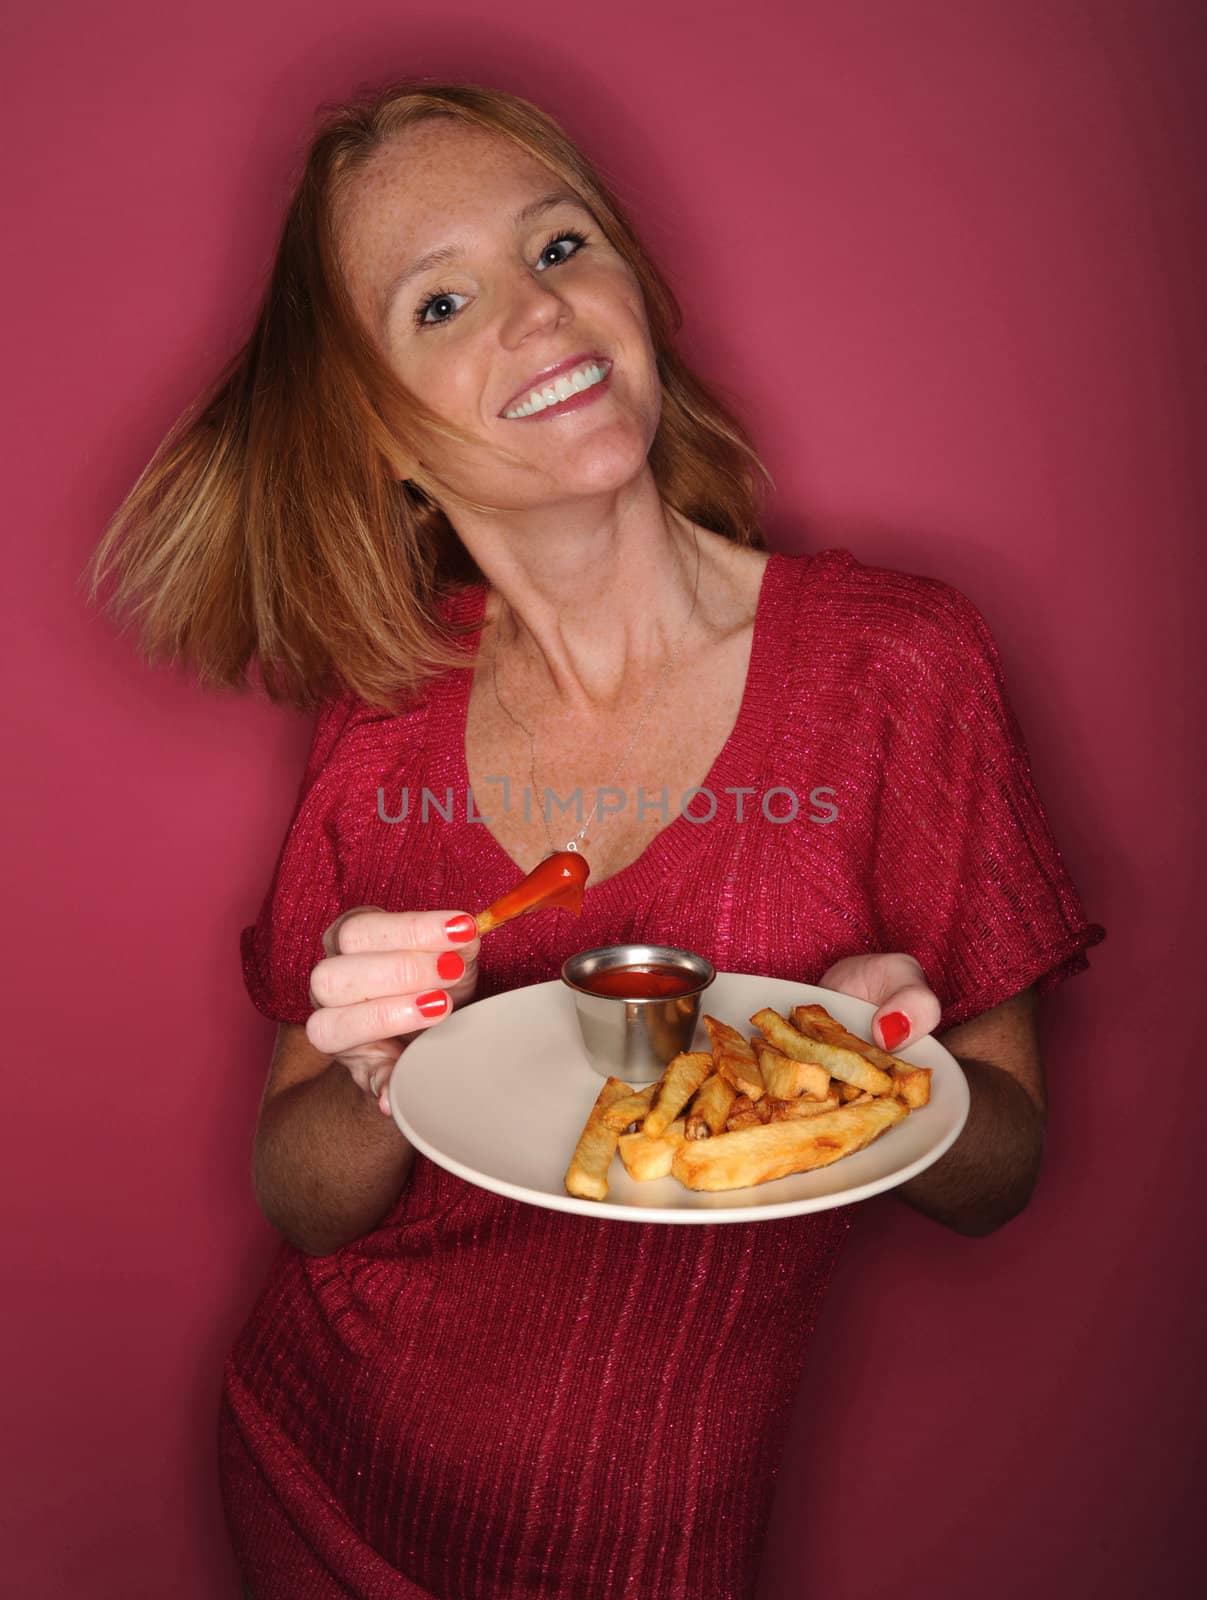 A pretty redhead smiling and enjoying French fries on a pink background